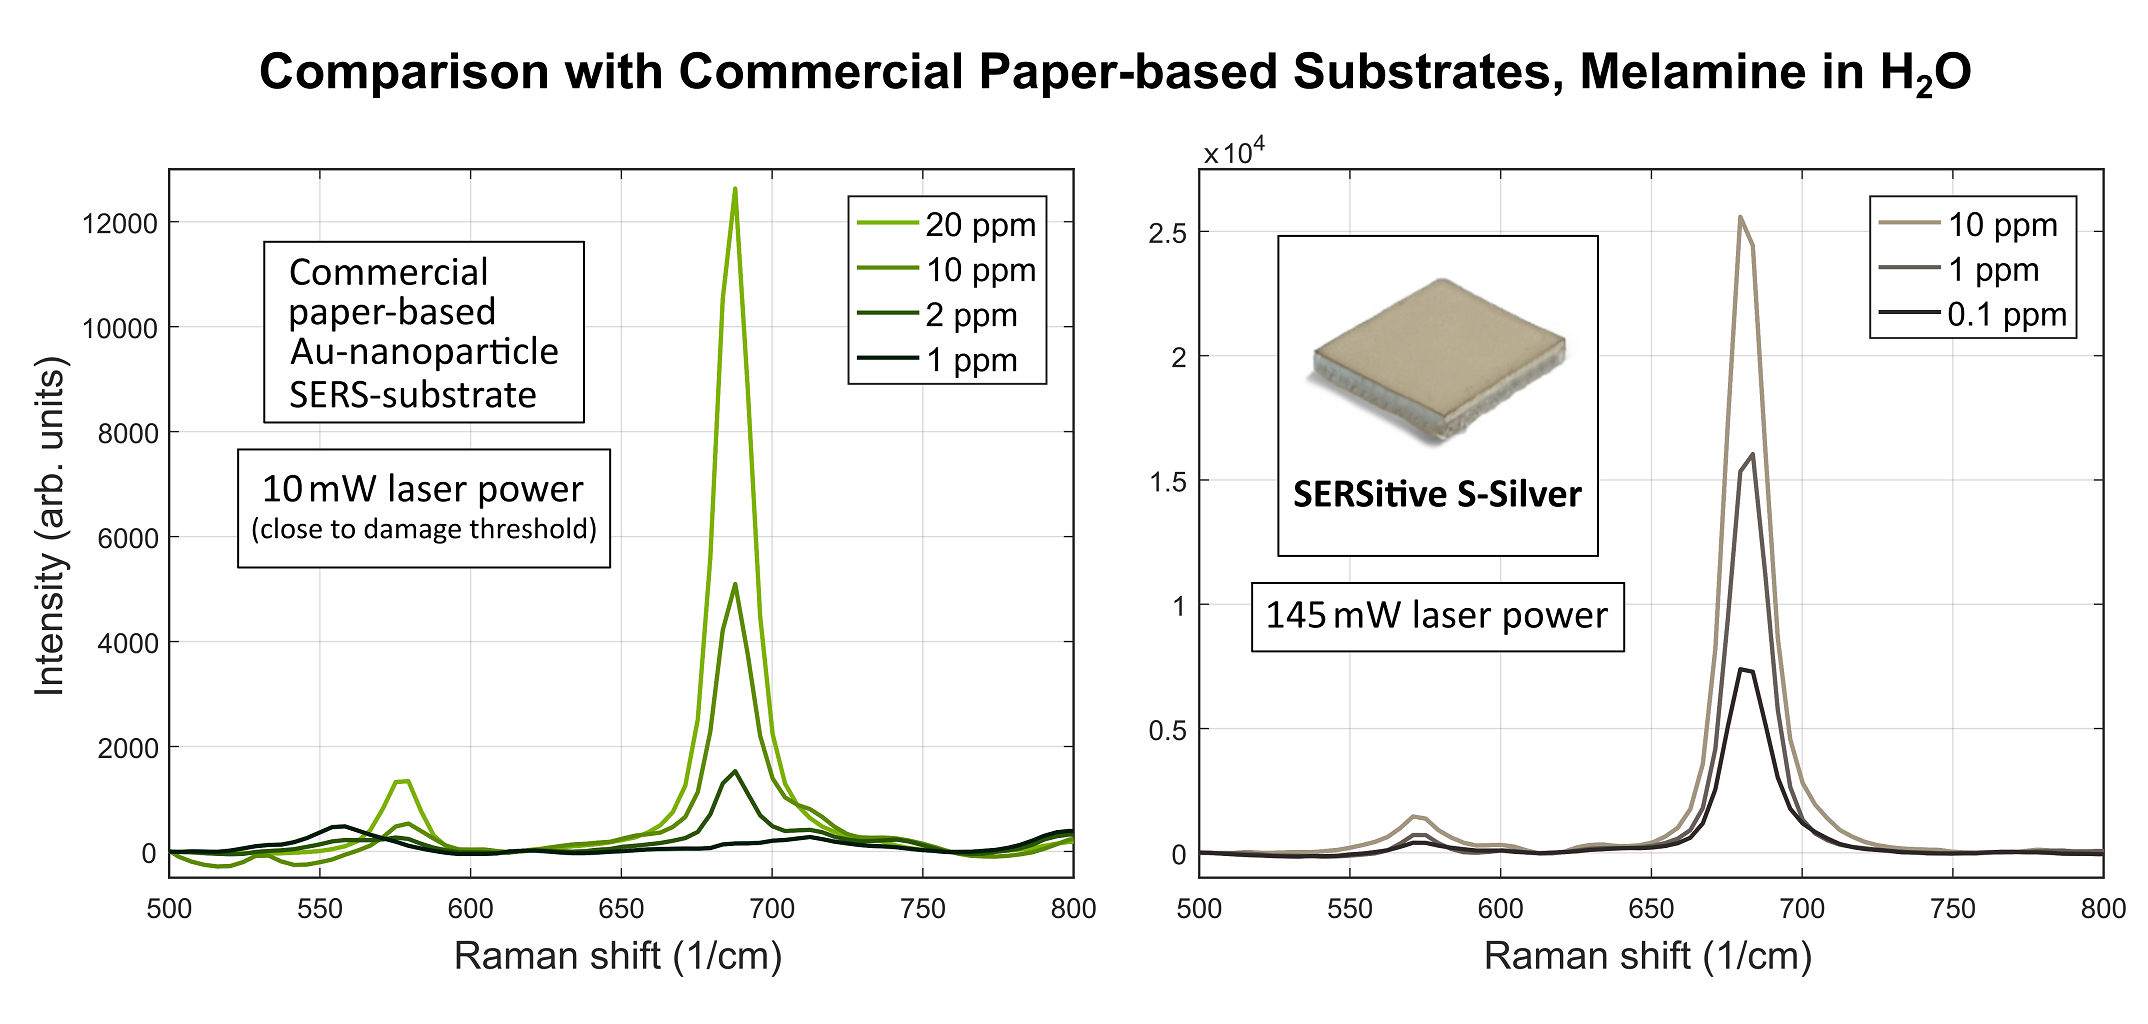 Comparison of SERSitive substrates with other commercial brand